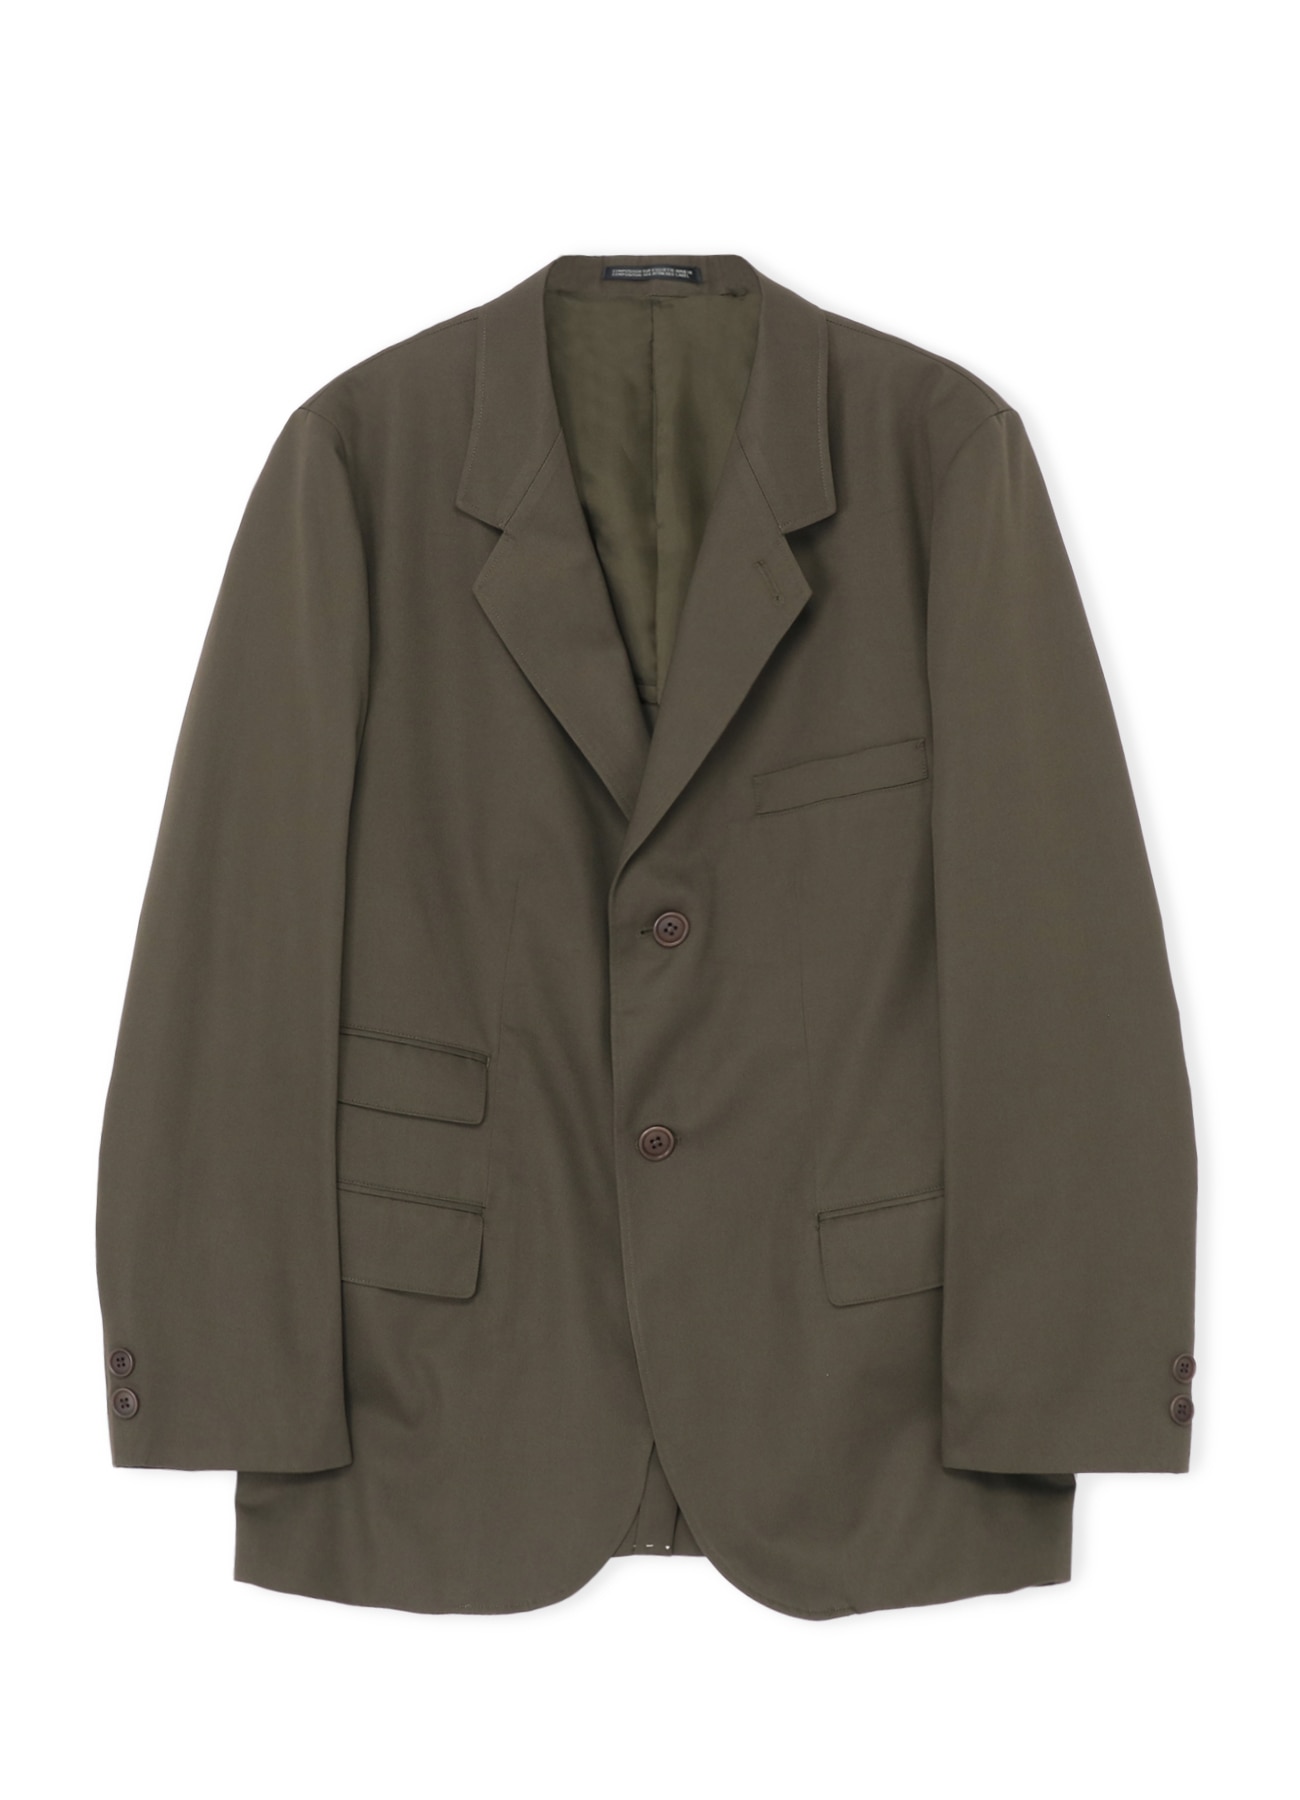 COTTON/POLYESTER TWILL 2-BUTTON JACKET